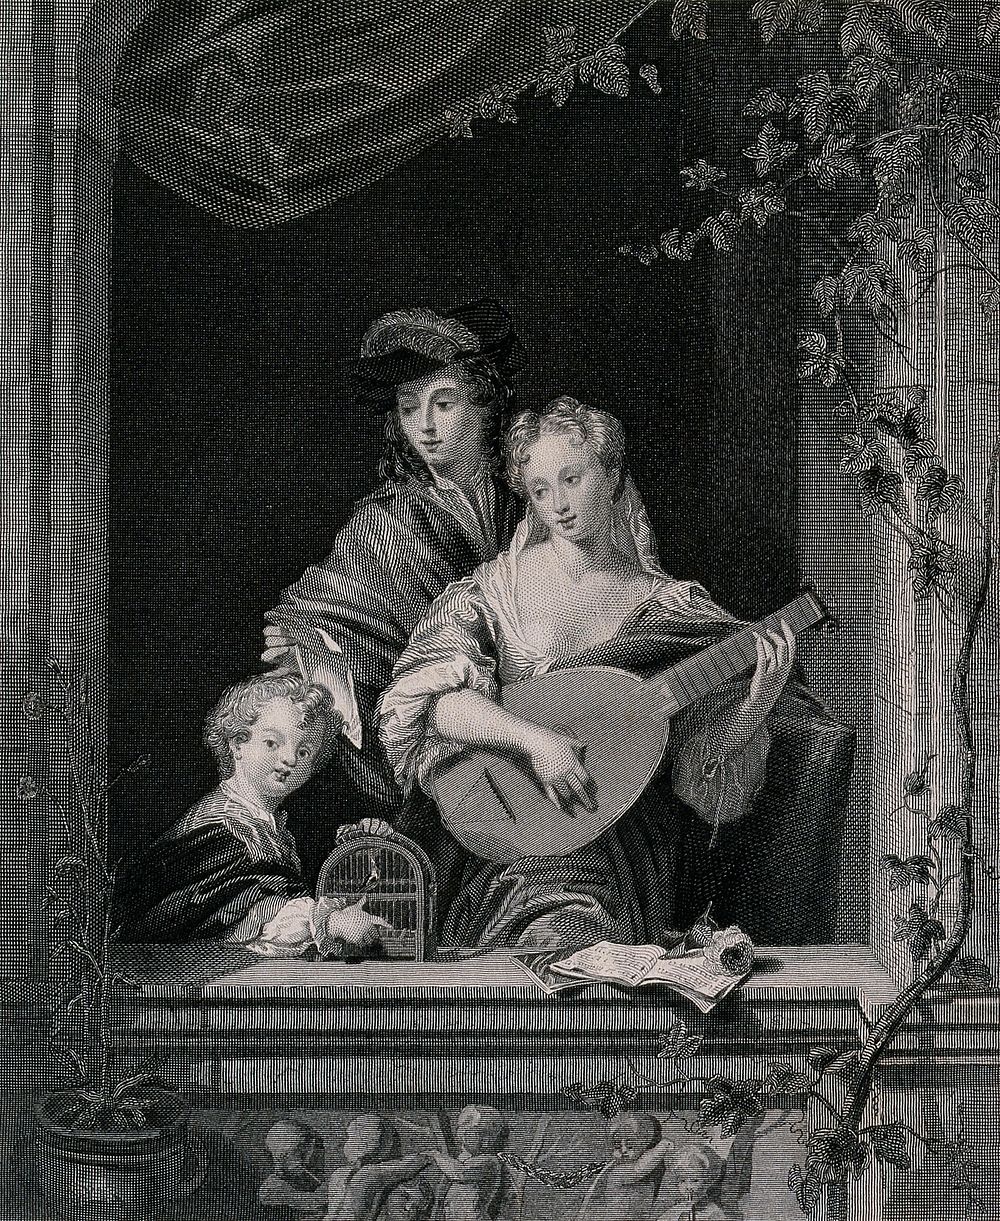 A family with a young child by an open window singing together with the woman playing an instrument. Engraving by W.H. Pyne…